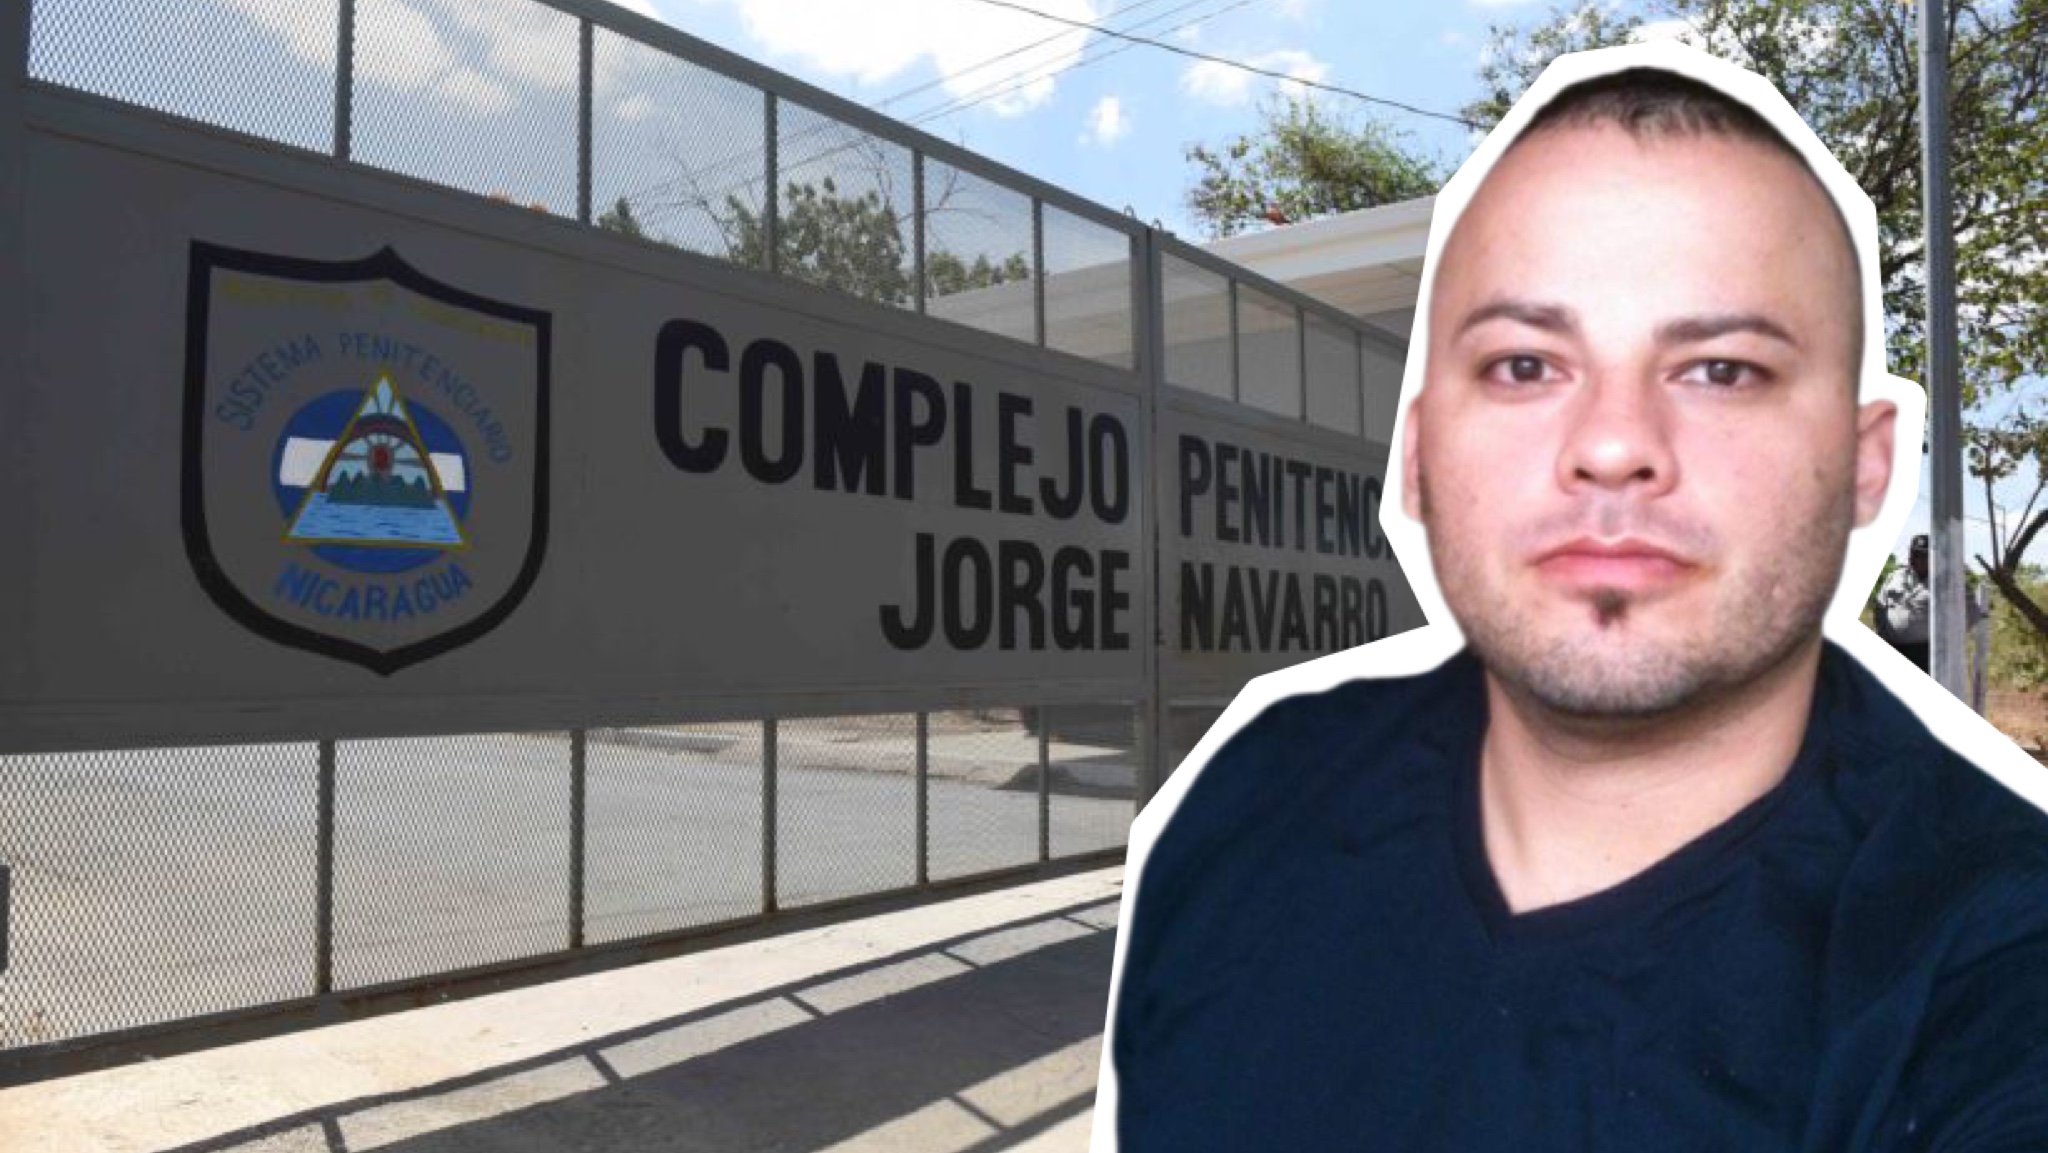 Political prisoner Jaime Navarrete has fainted and has been left unconscious in his cell